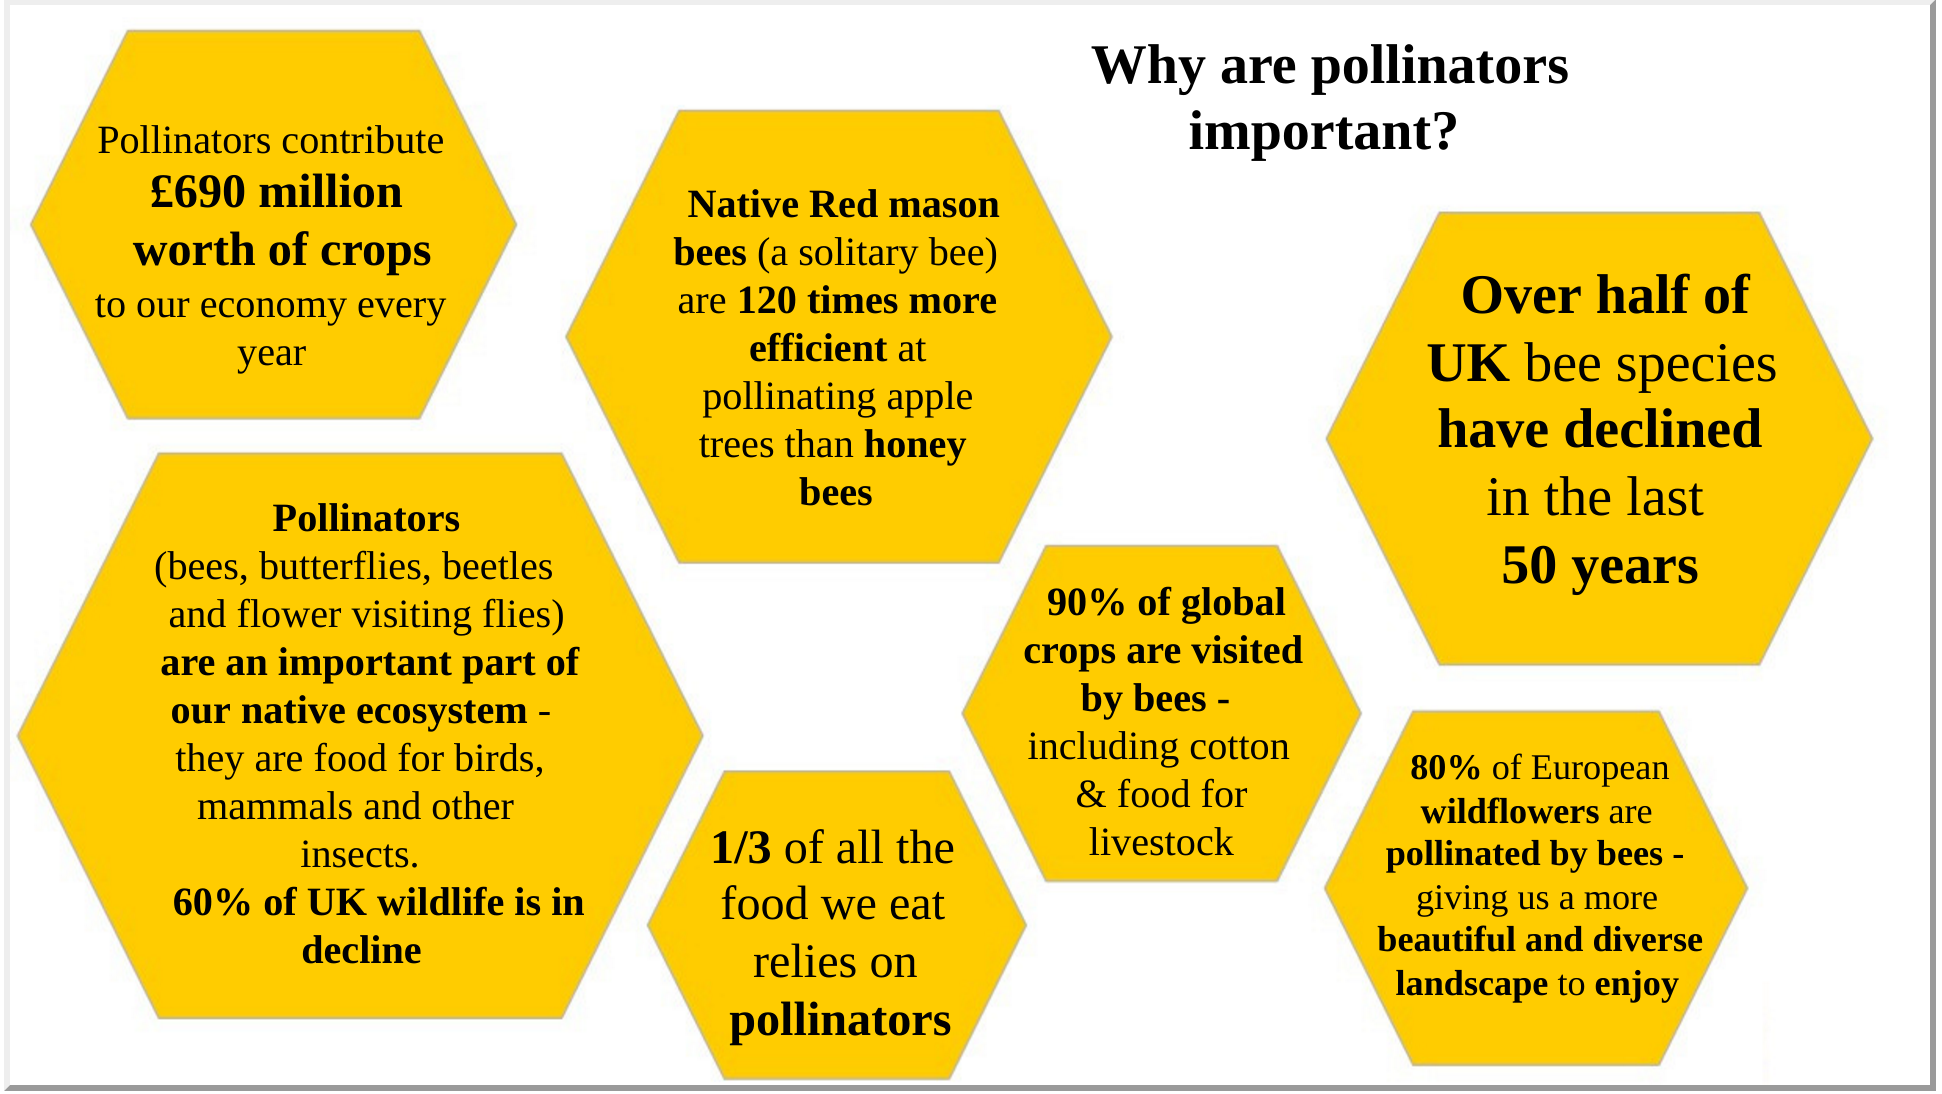 Pollinators contribute £690 million worth of crops to our economy every year 